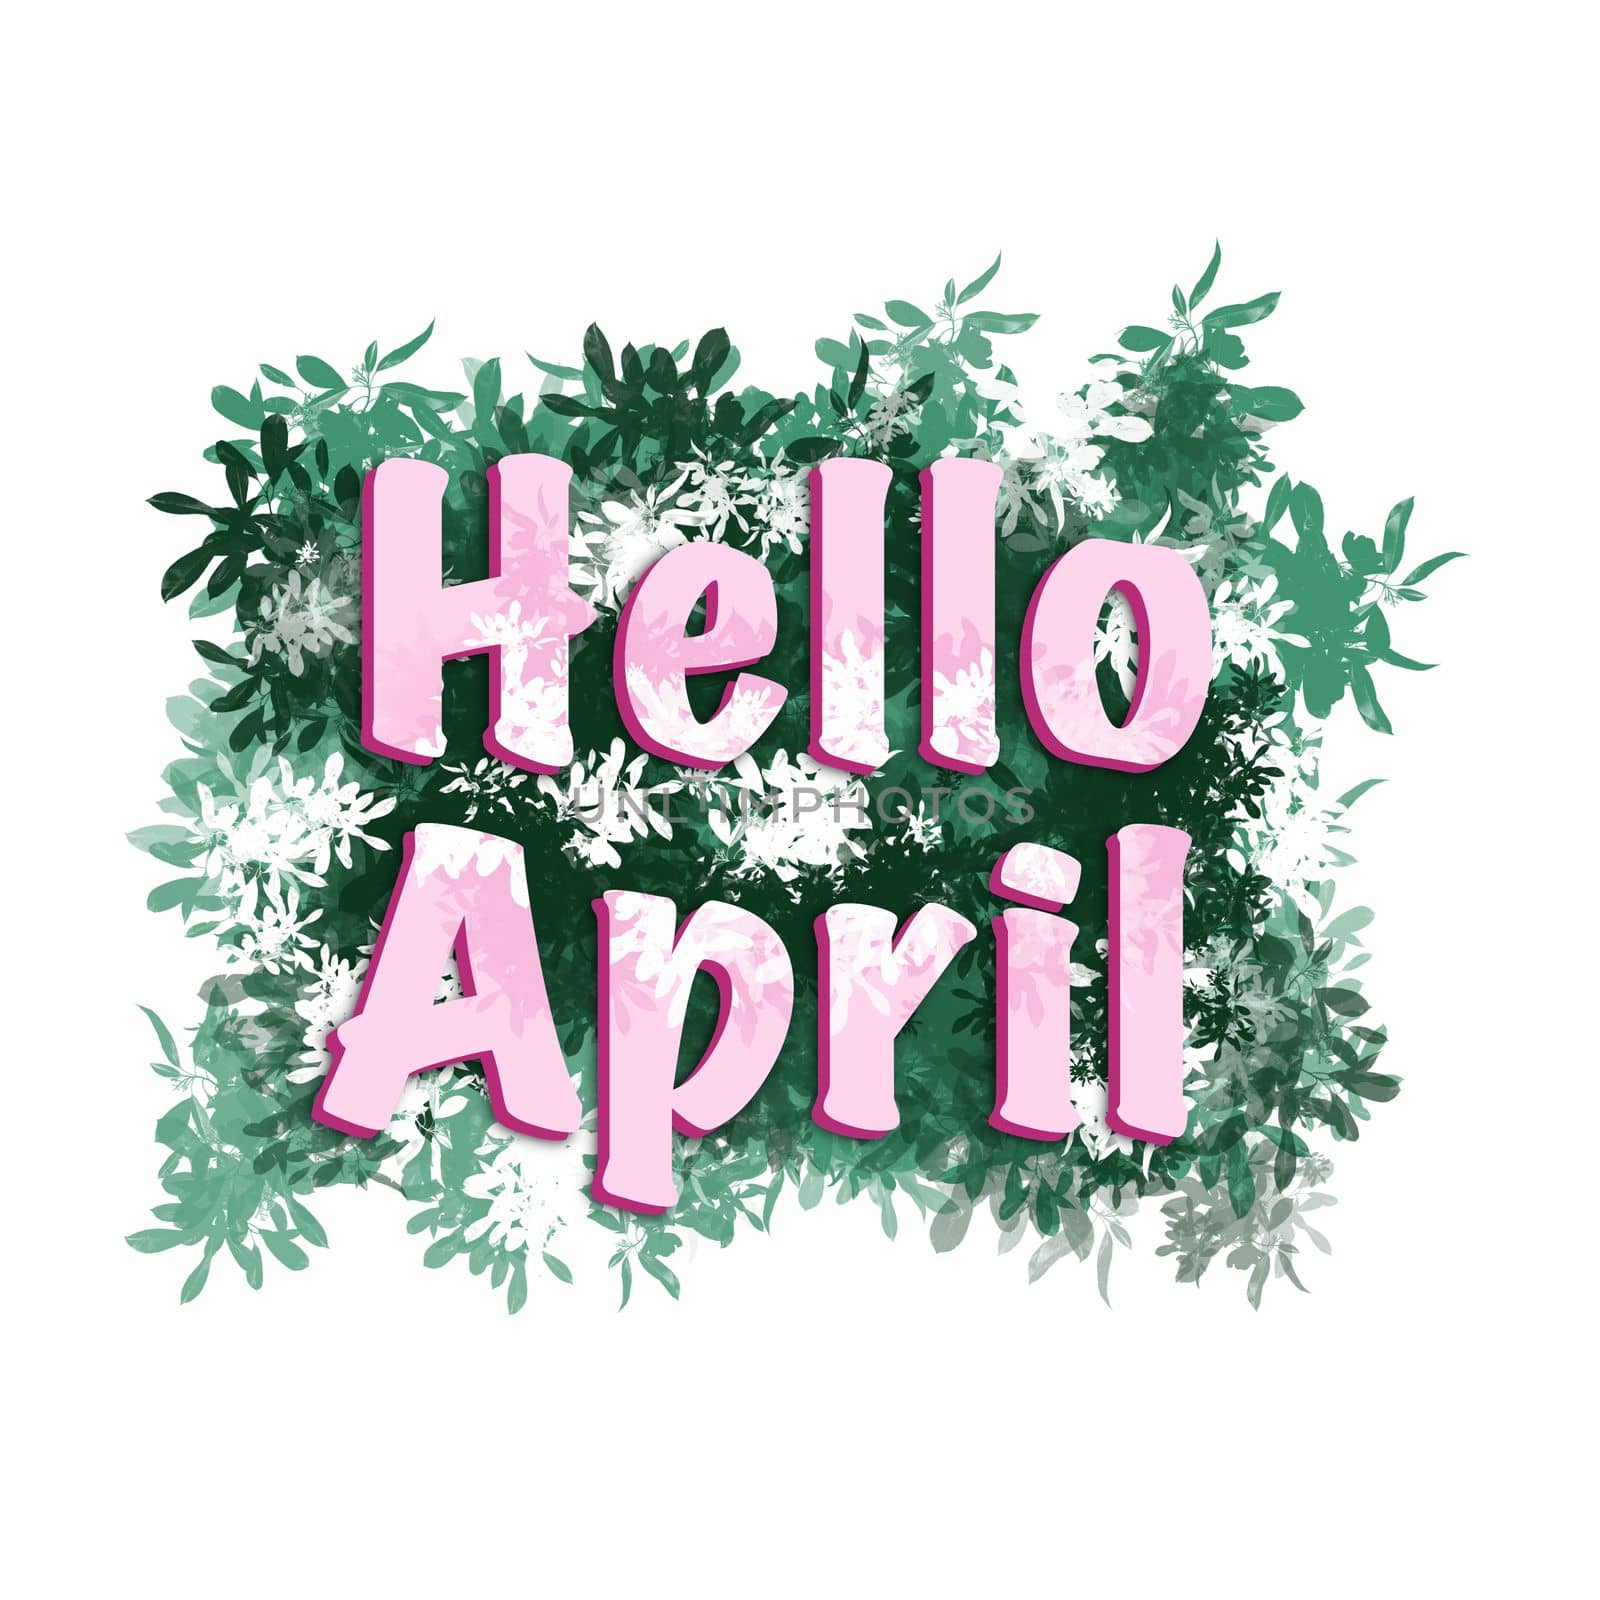 Hello April hand drawn illustration. Spring sticker banner card greeting in pastel colors with flowers leaves nature colorful flora, scrapbooking bullet journal label, lettering calligraphy words